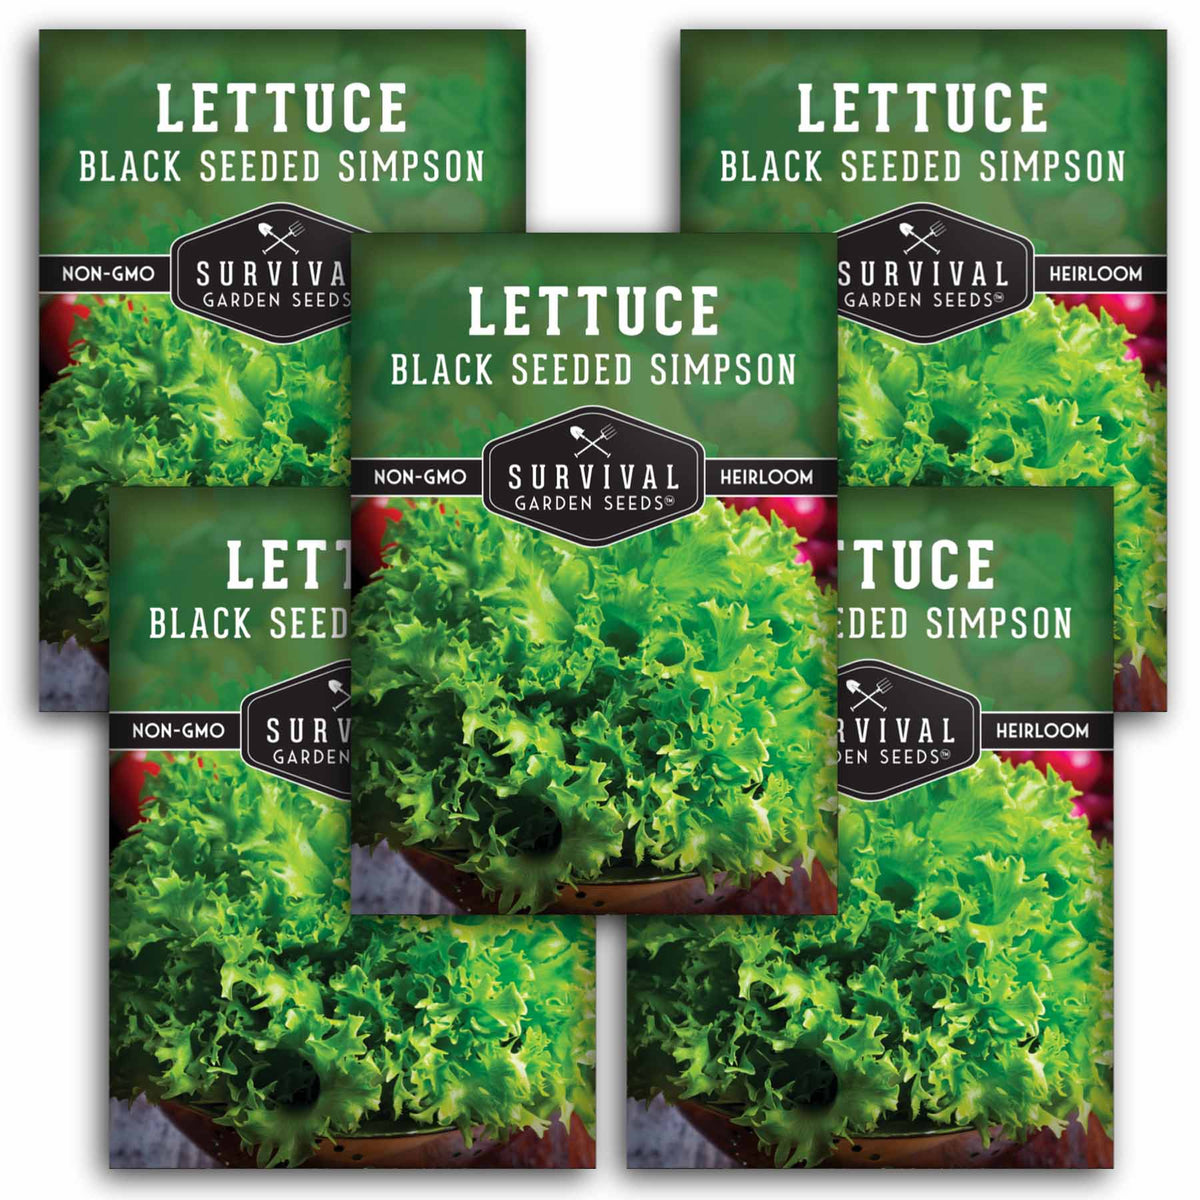 5 packets of Black Seeded Simpson Lettuce seeds